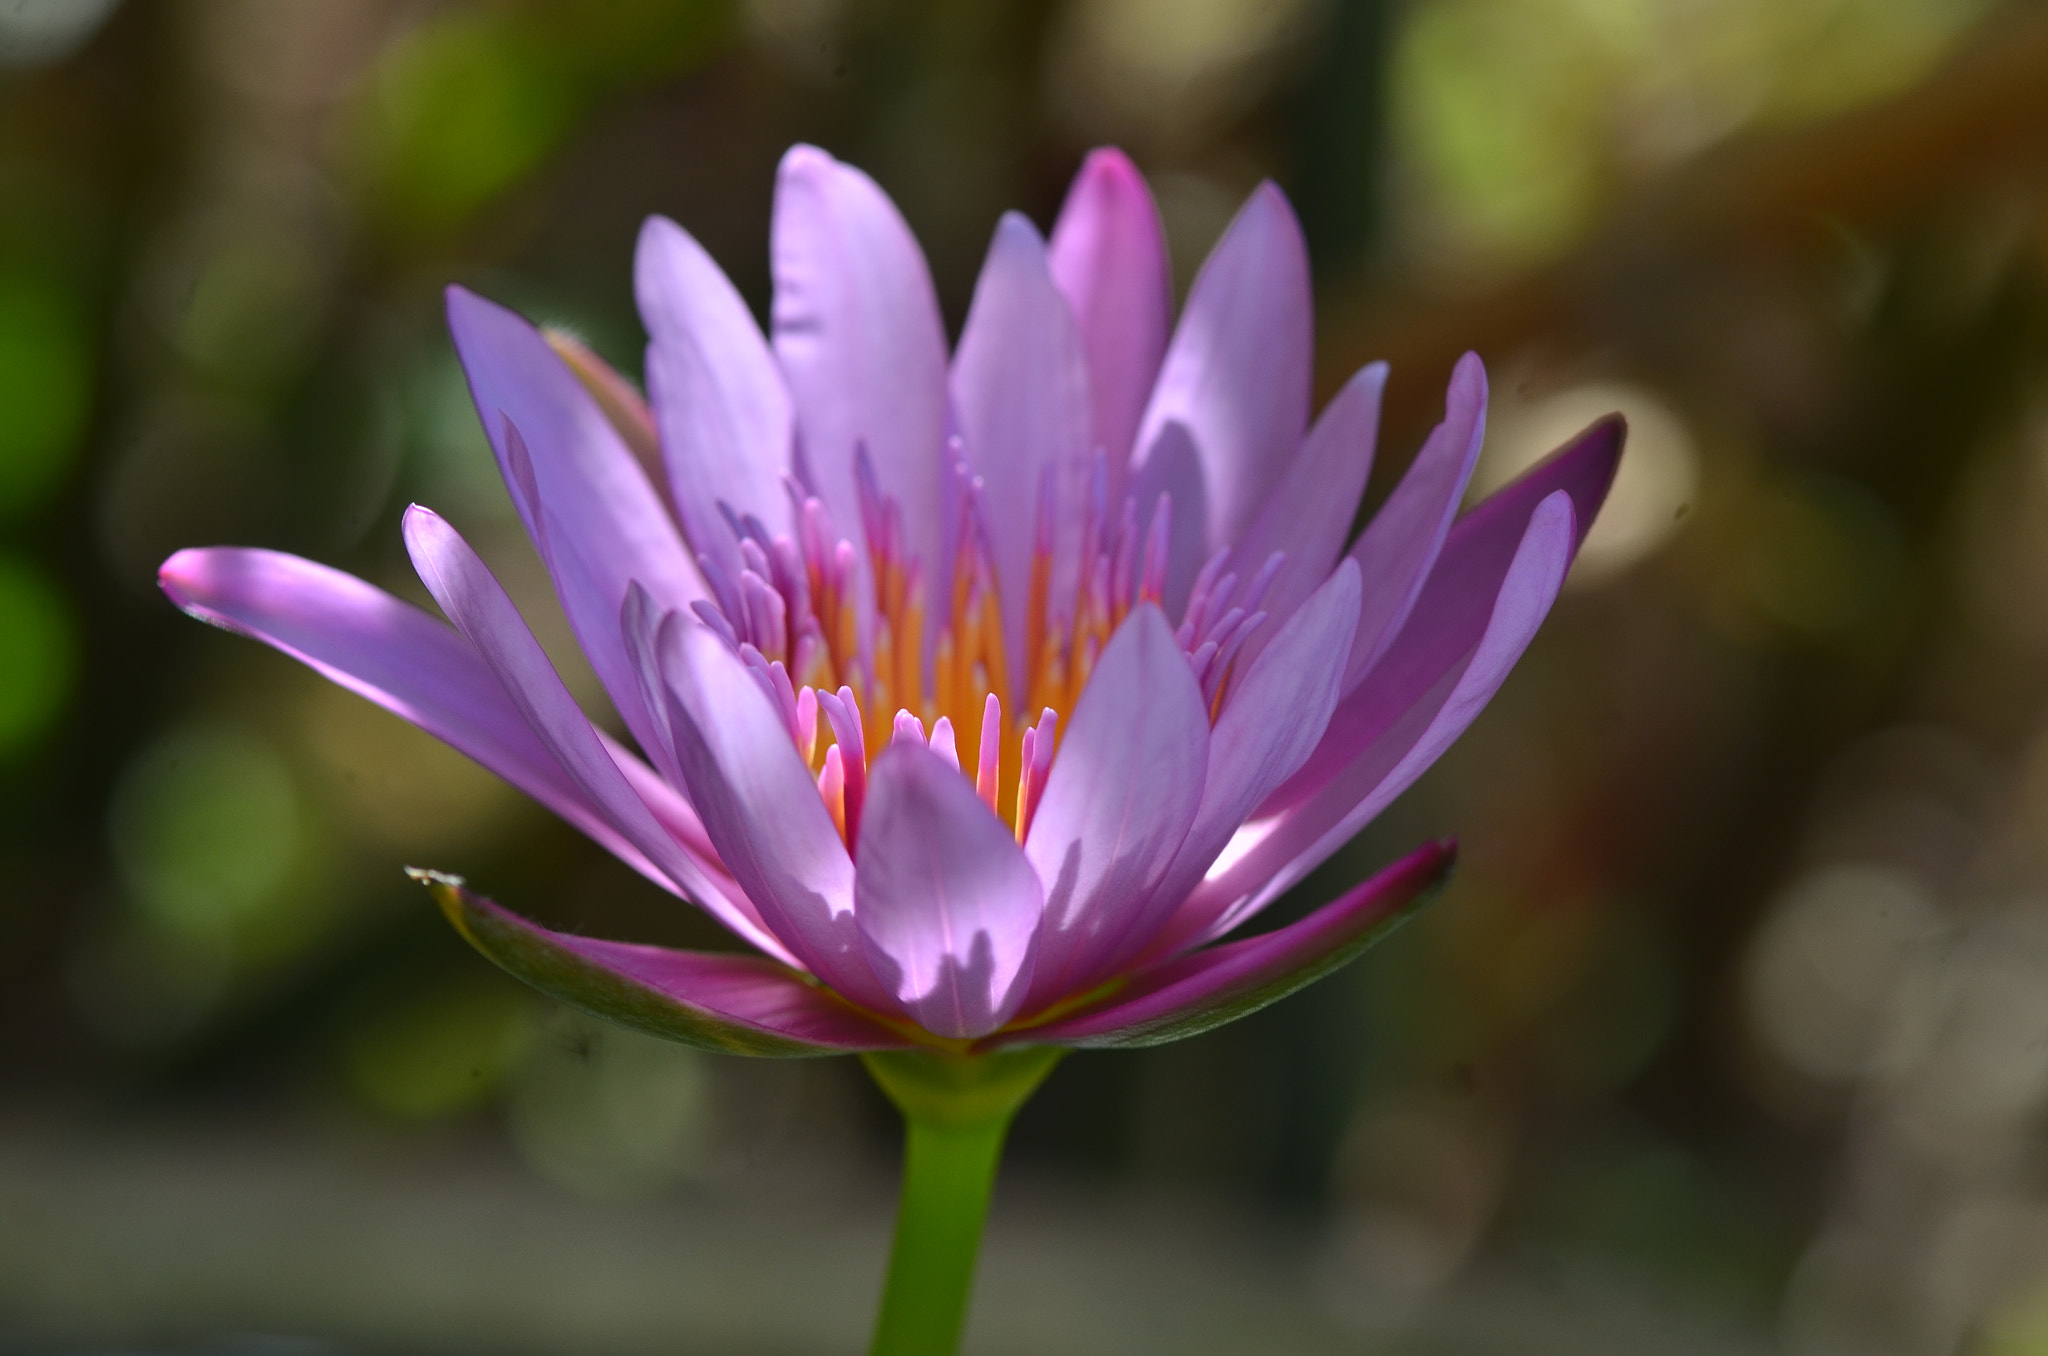 Nikon D7000 + Nikon AF-S Micro-Nikkor 105mm F2.8G IF-ED VR sample photo. My waterlily photography